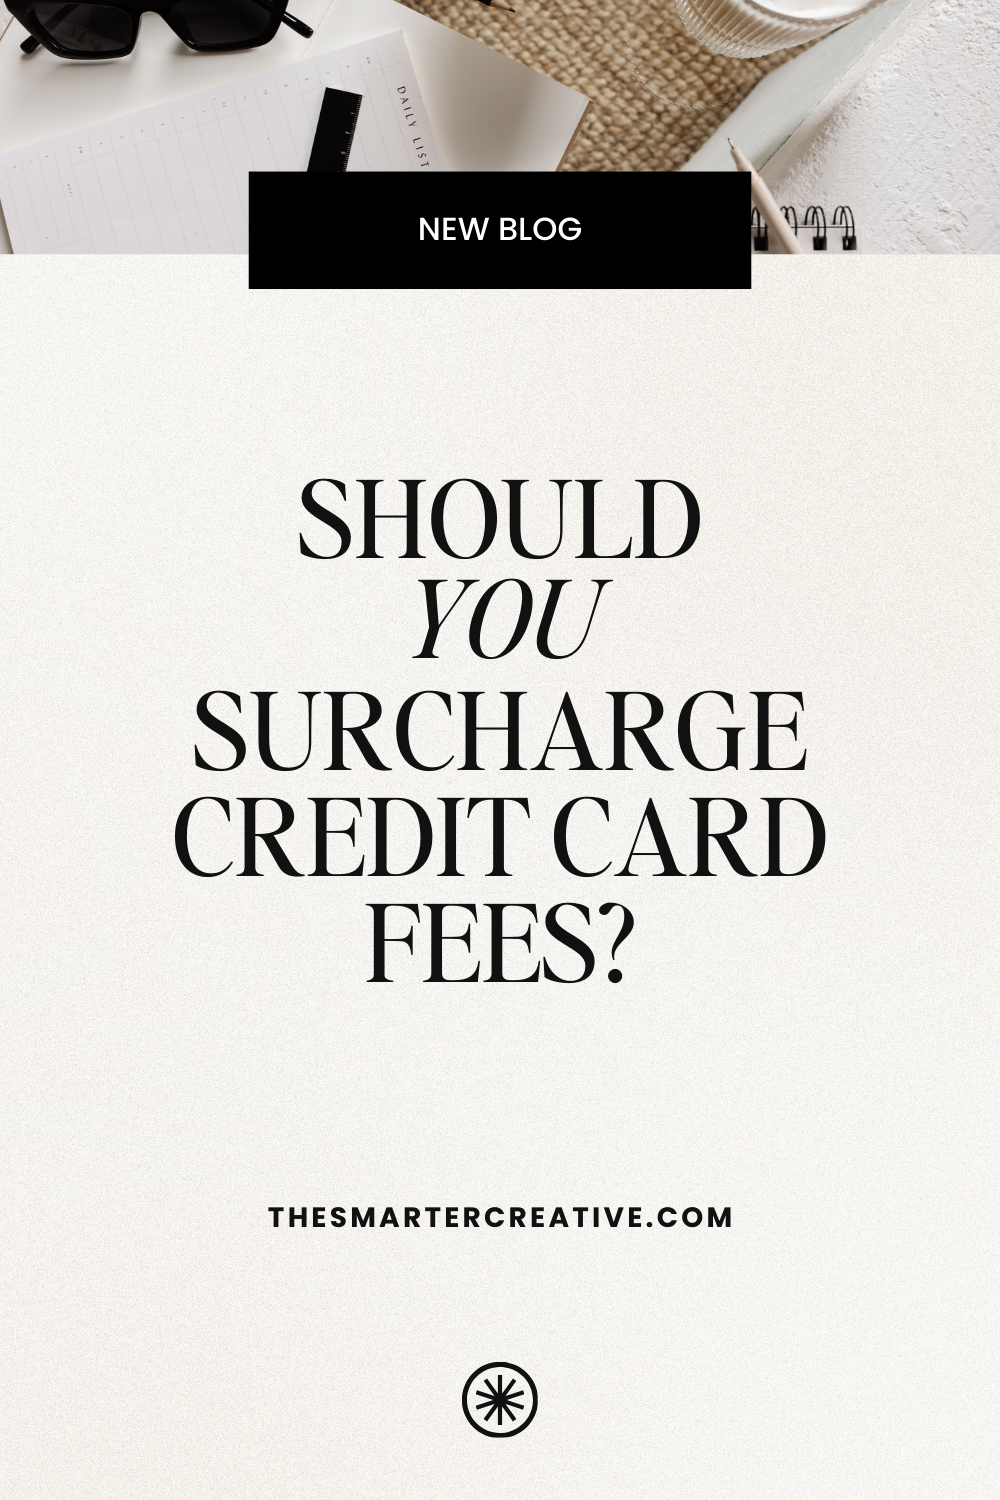 Should YOU surcharge credit card fees?